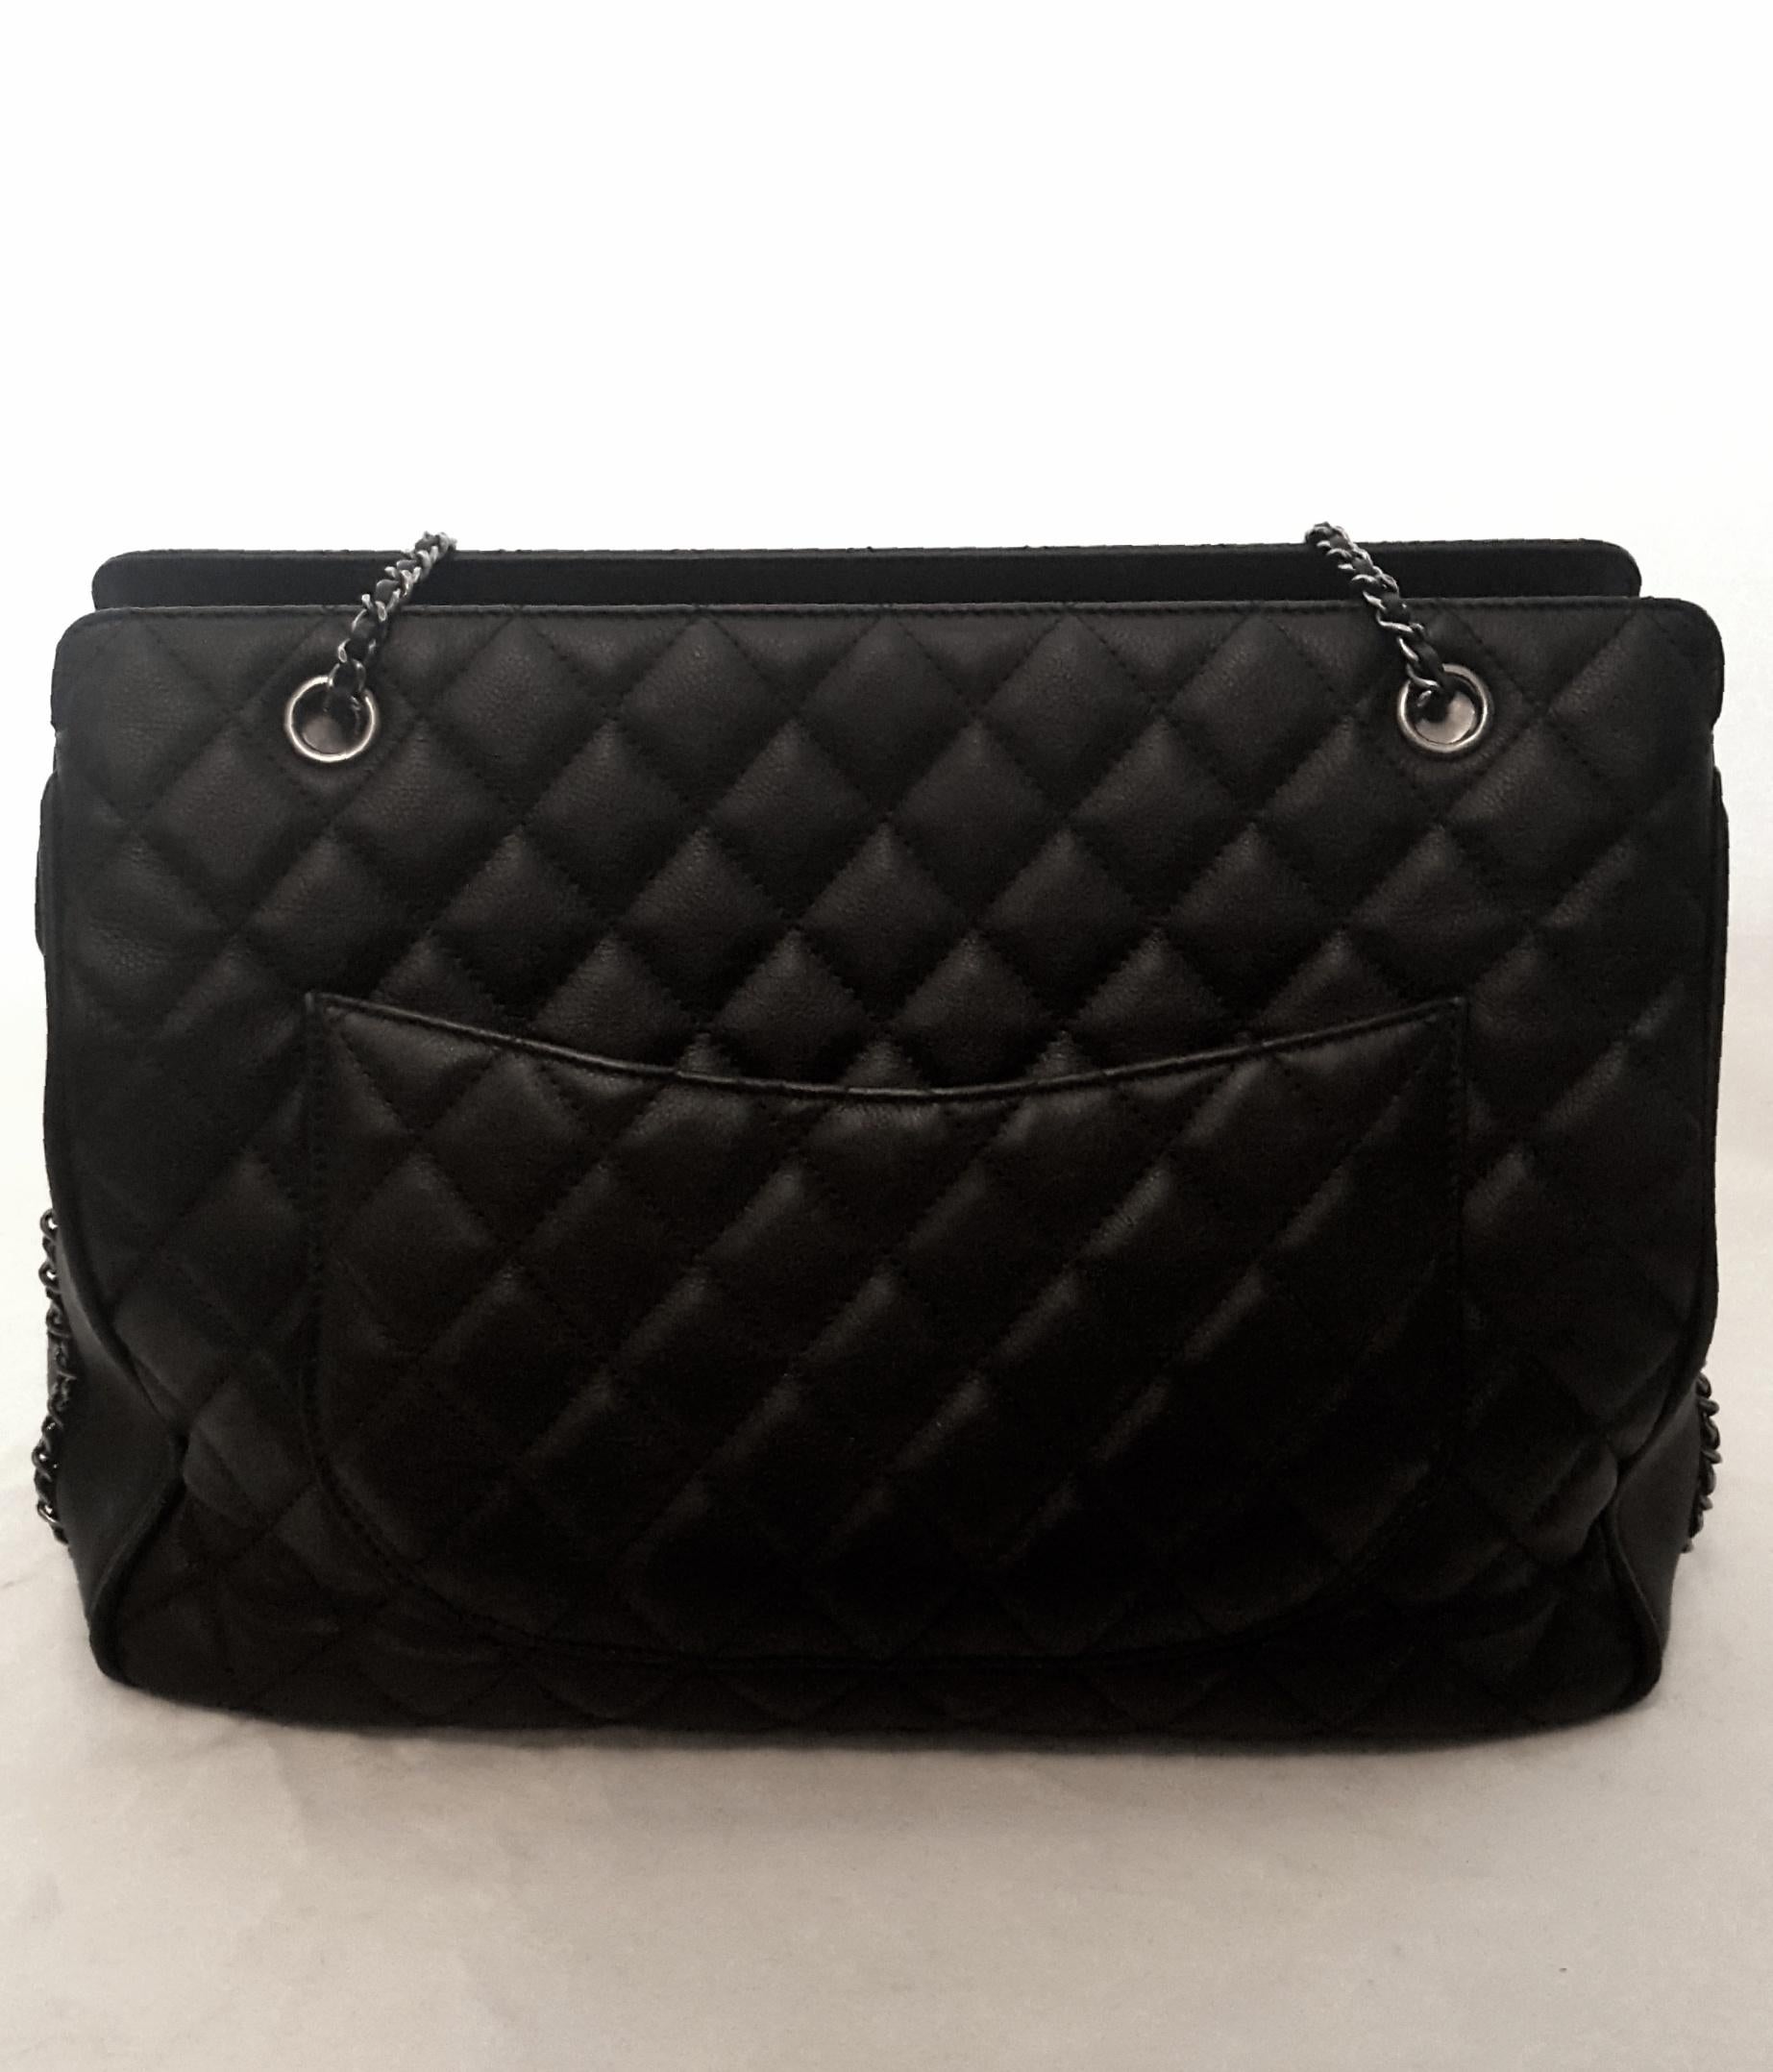 Black Chanel Diamond Quilt Leather W/ Ruthenium Chain Link & Leather Shoulder Pad Tote